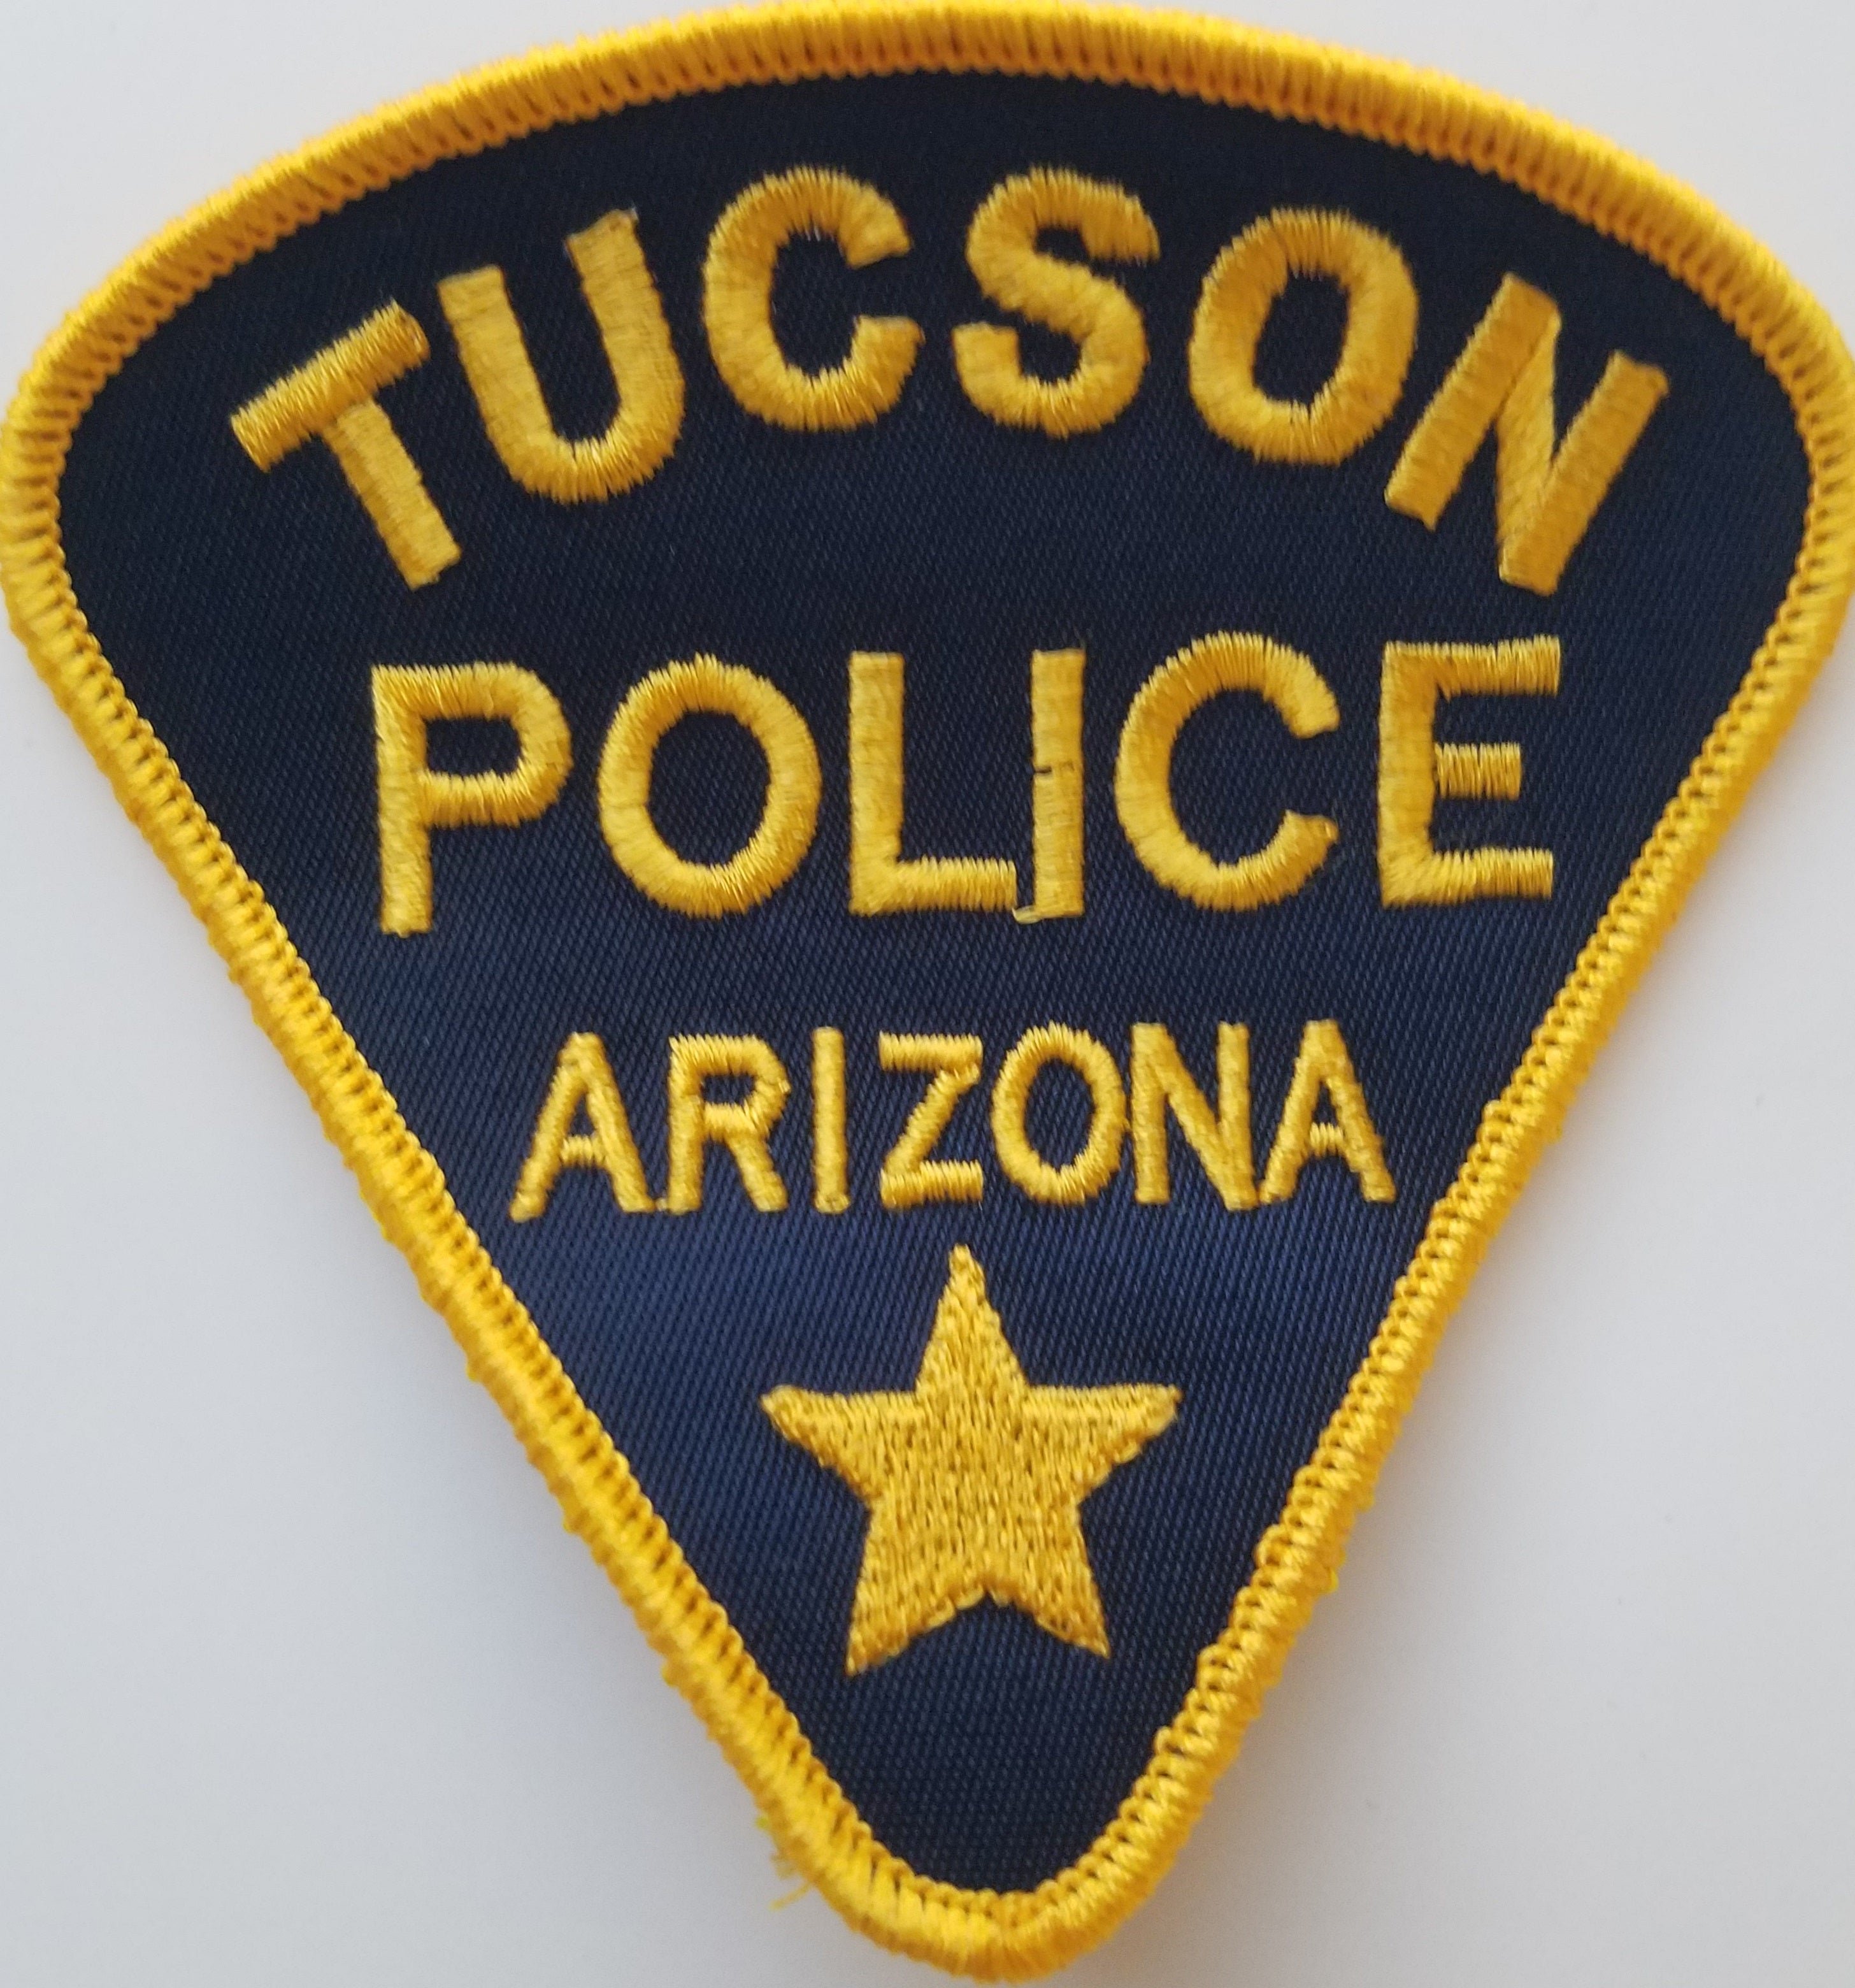 Tucson Police - Reaper Patches